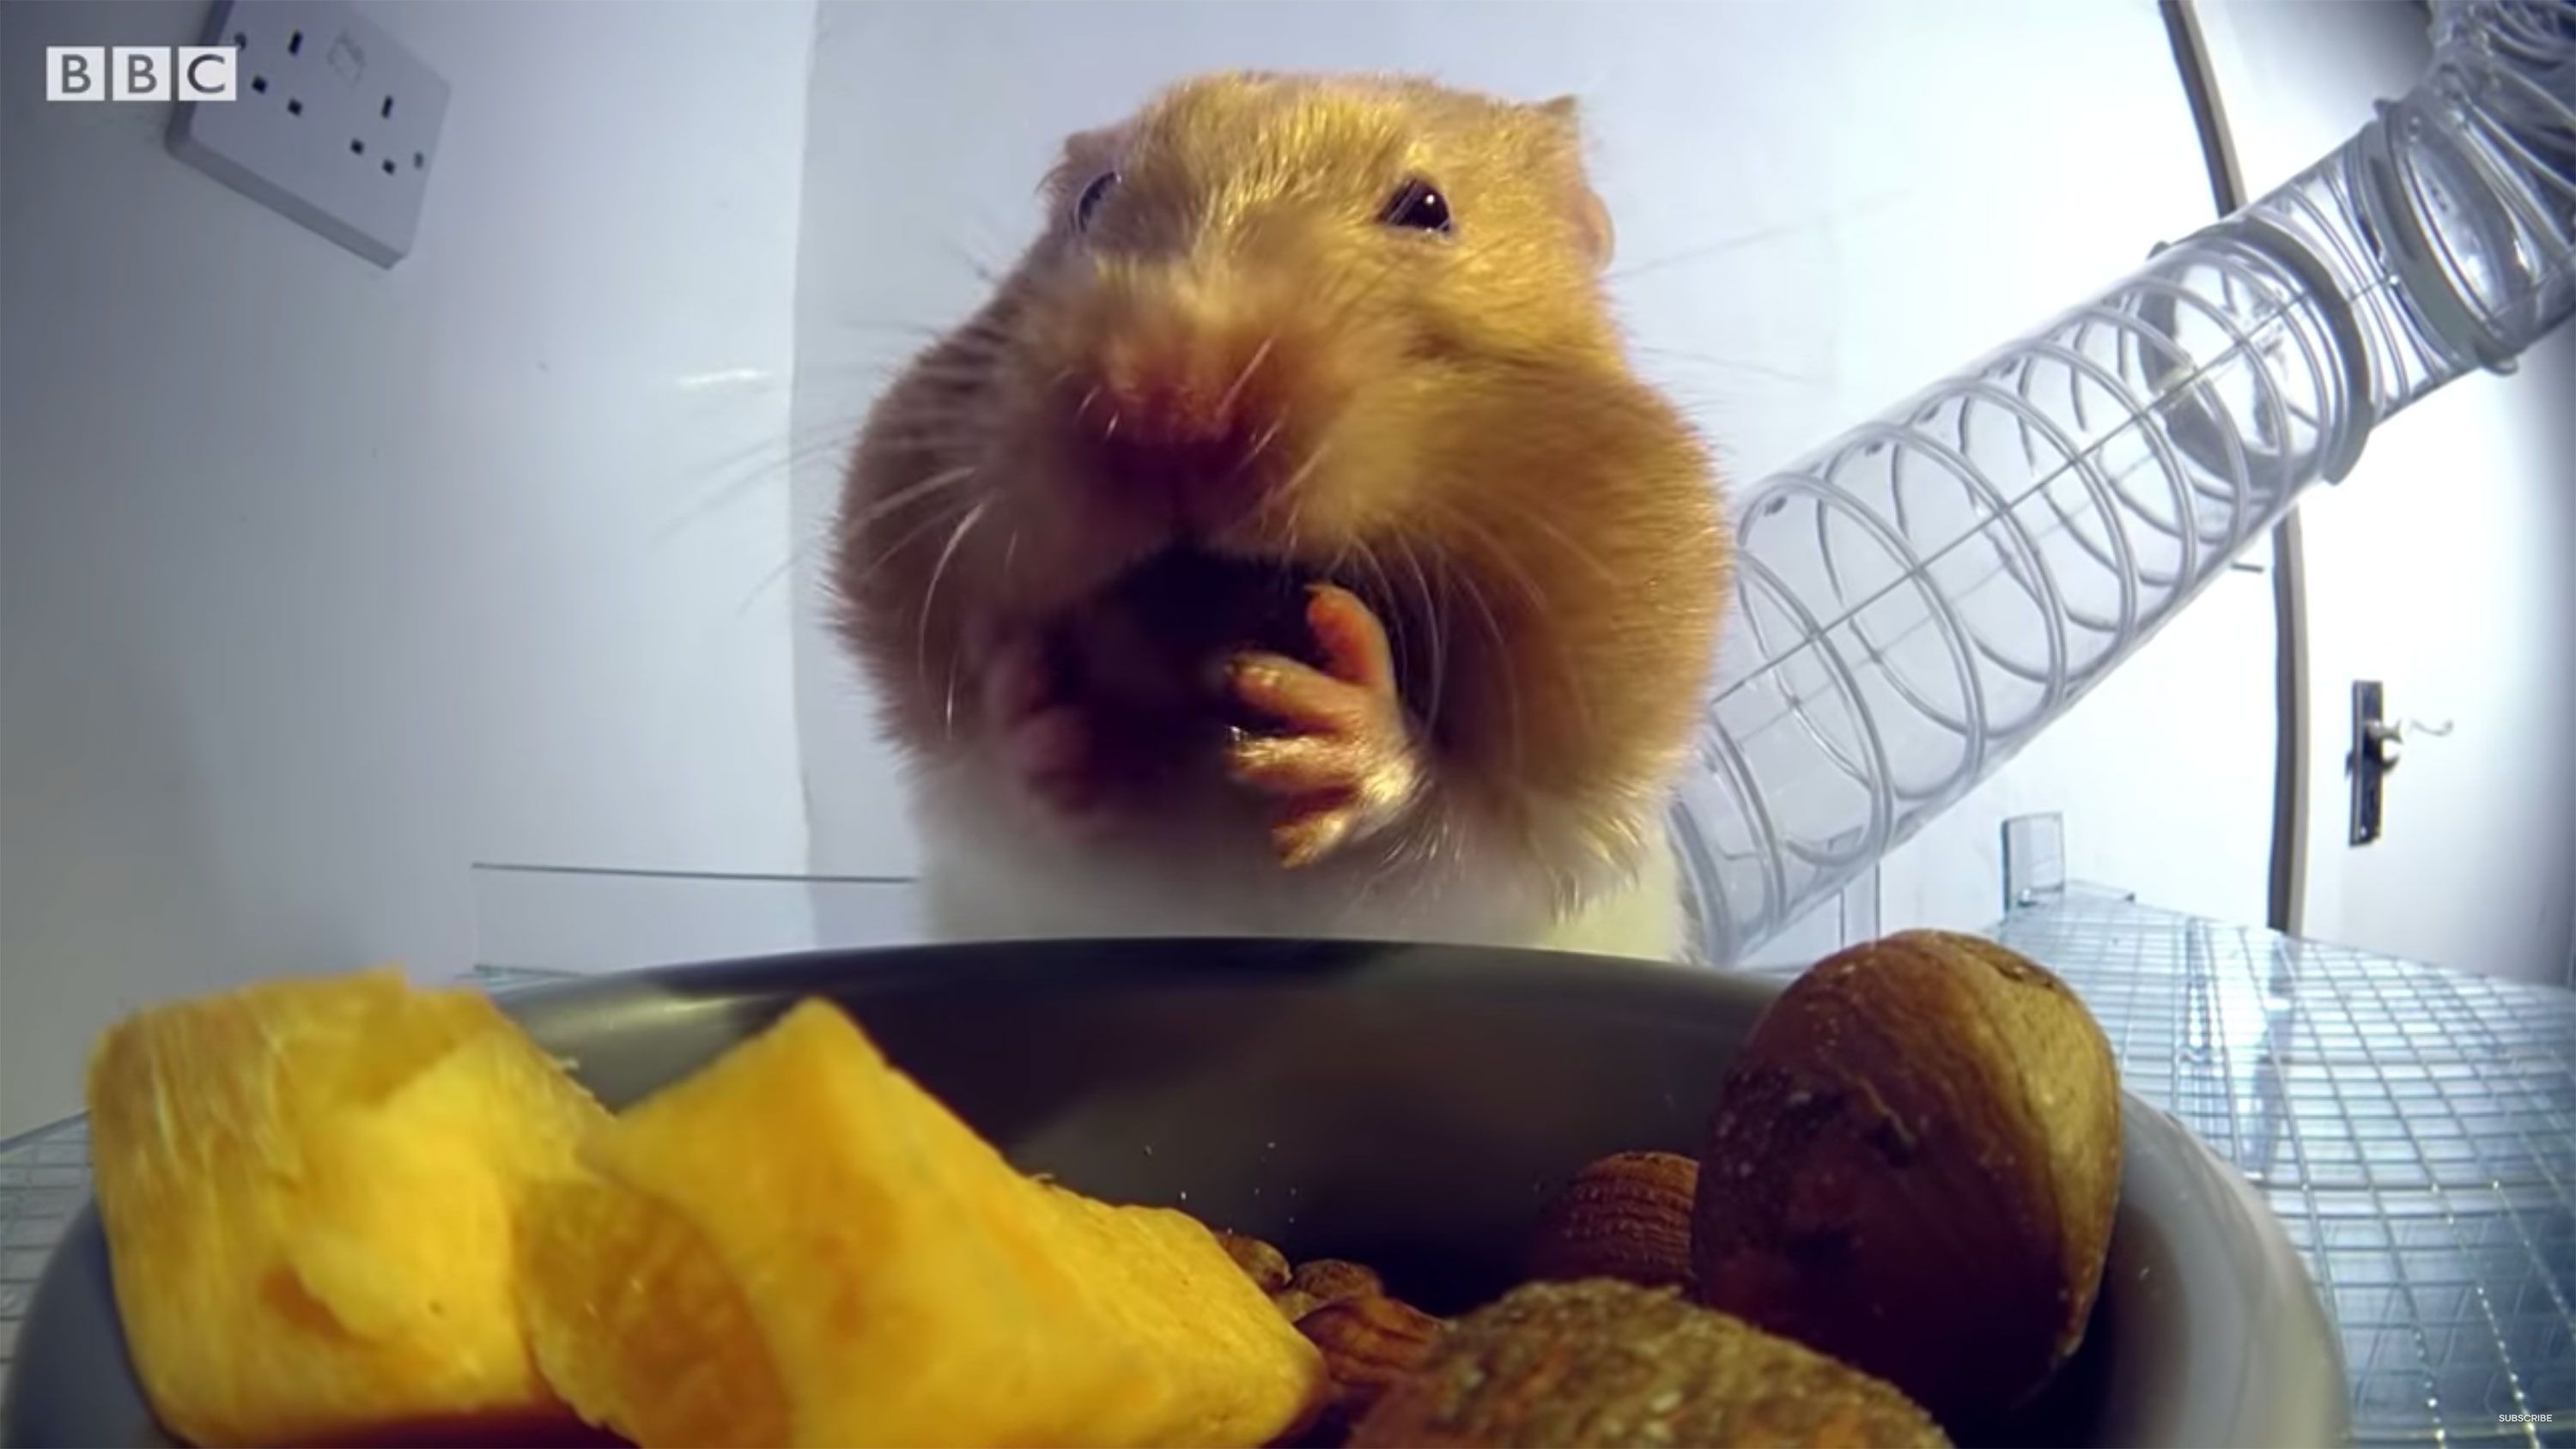 hamsters with food in cheeks